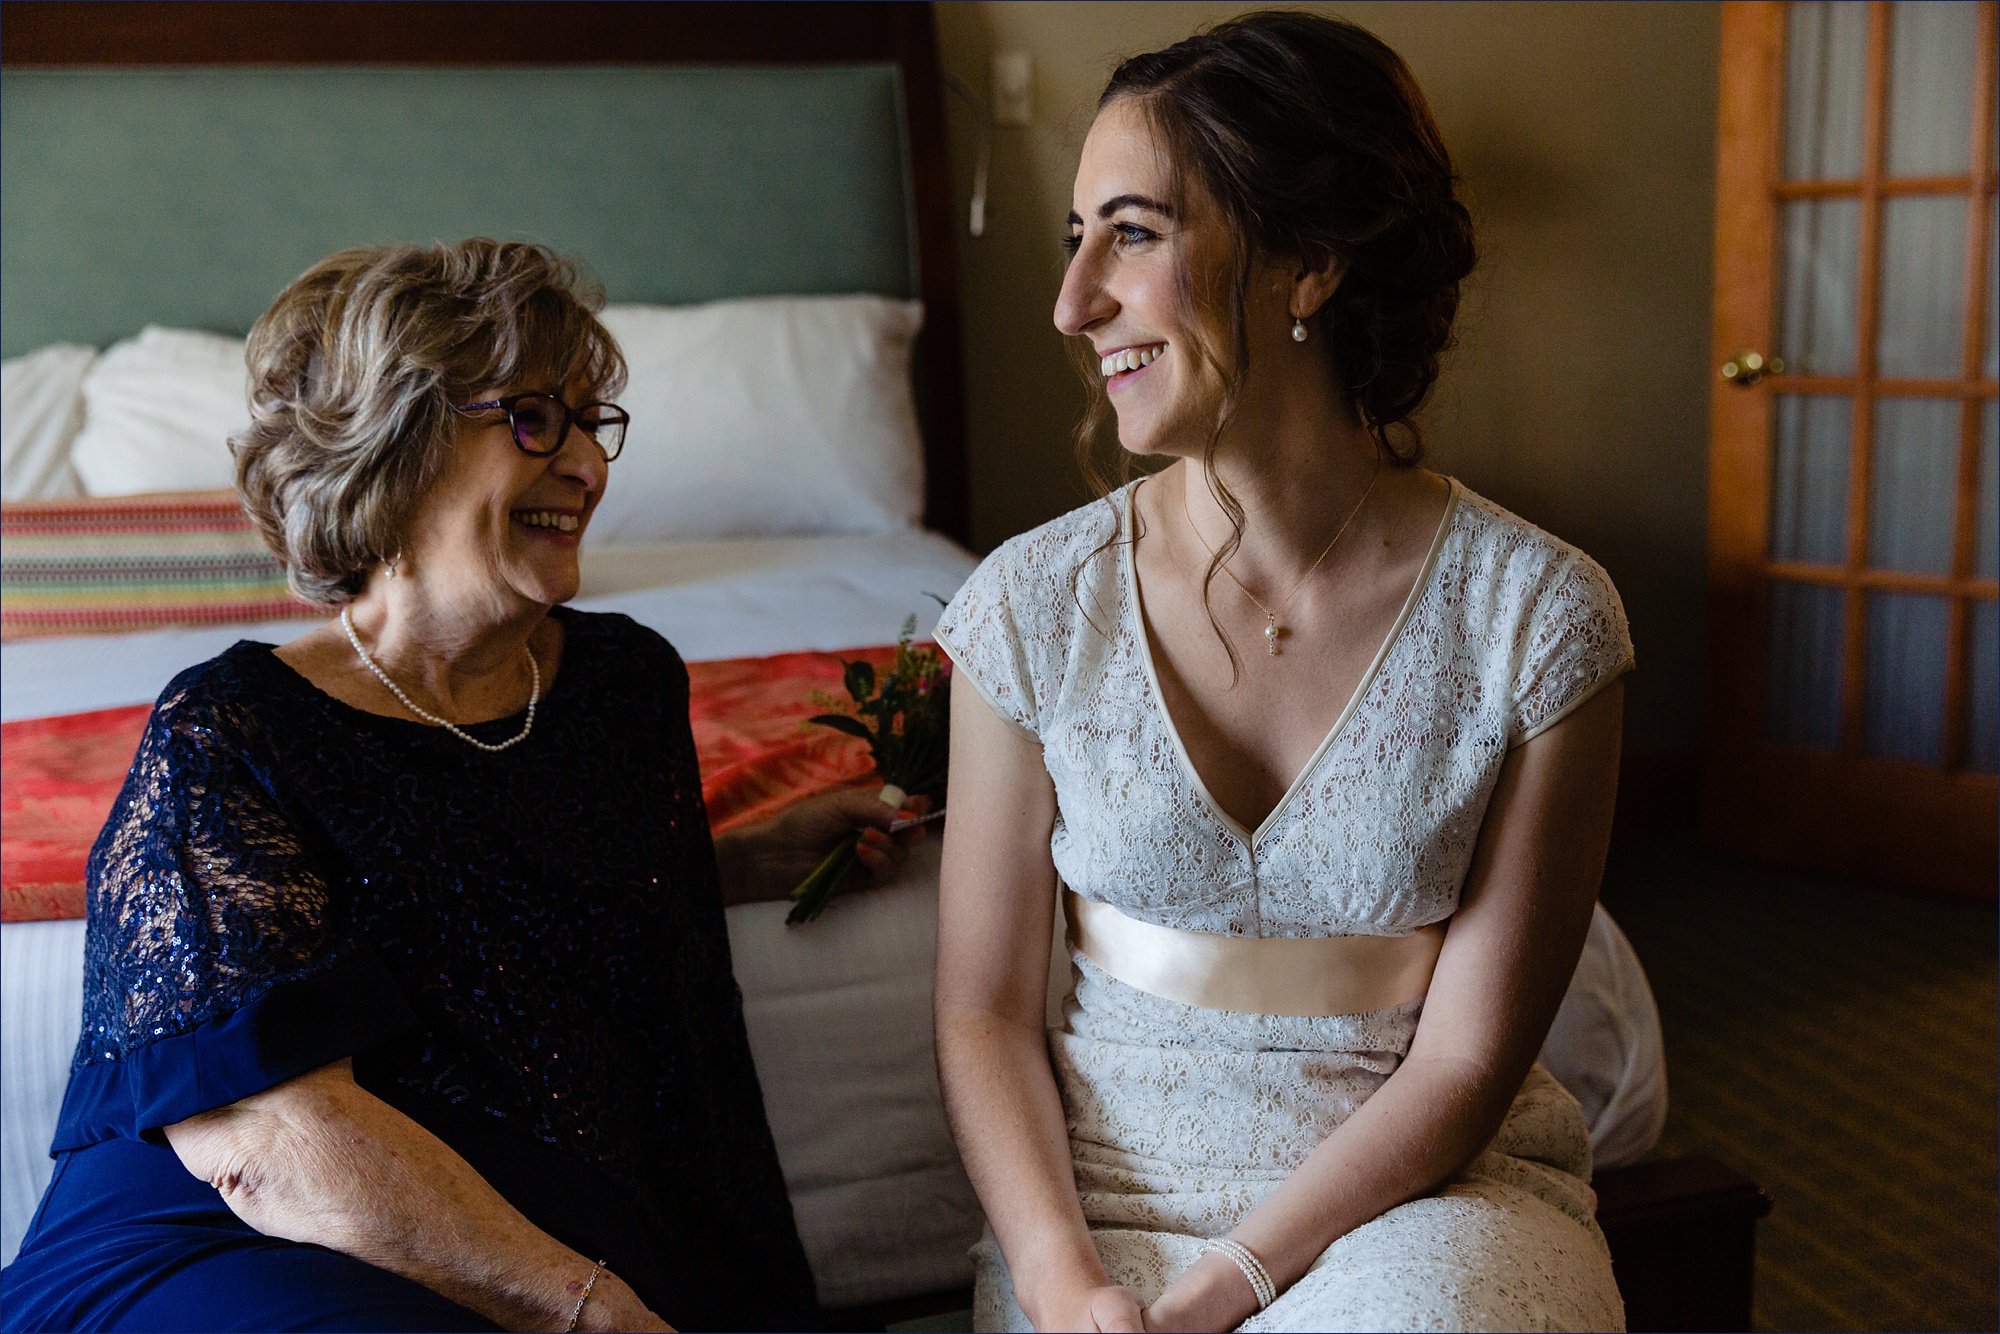 The bride shares a laugh with her mom on her intimate wedding day celebration